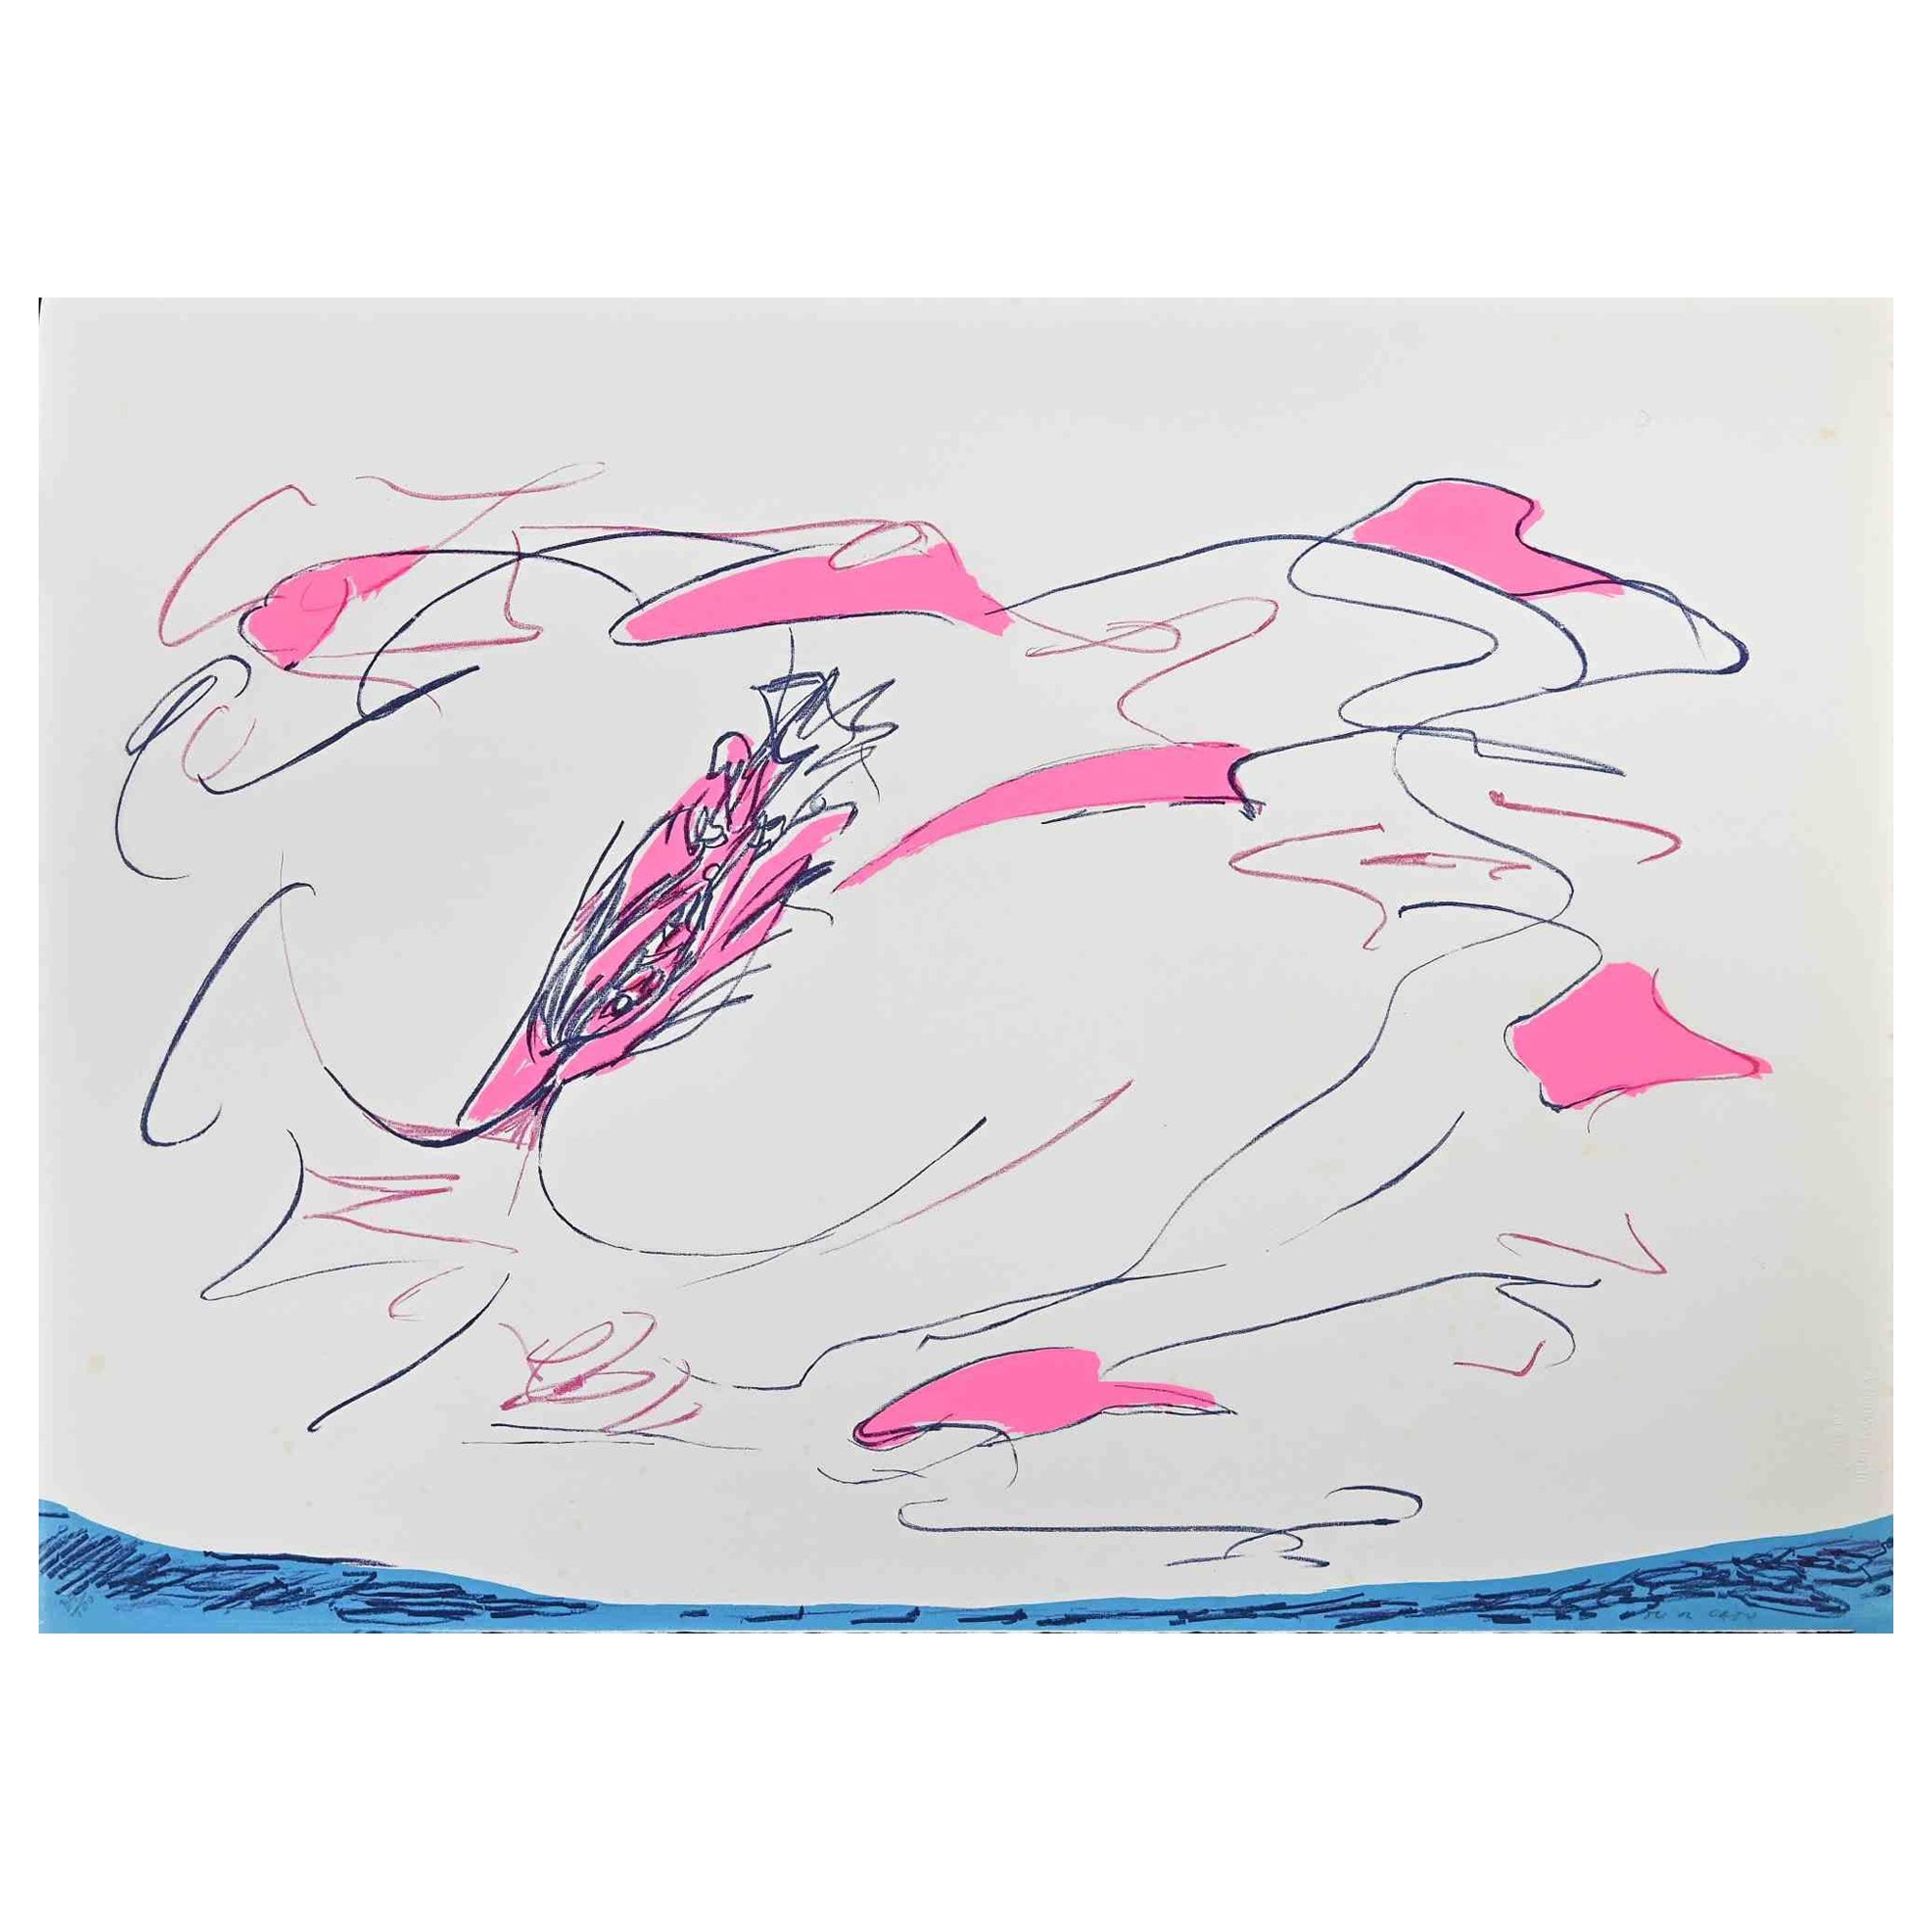 Abstract Pink  Composition is a colored screen print realized by the contemporary artist Giulio Turcato in 1973.

Hand-signed in pencil on the lower right.

Numbered on the lower left margin, edition 85/100.

Authenticity label of La Nuova Foglio on